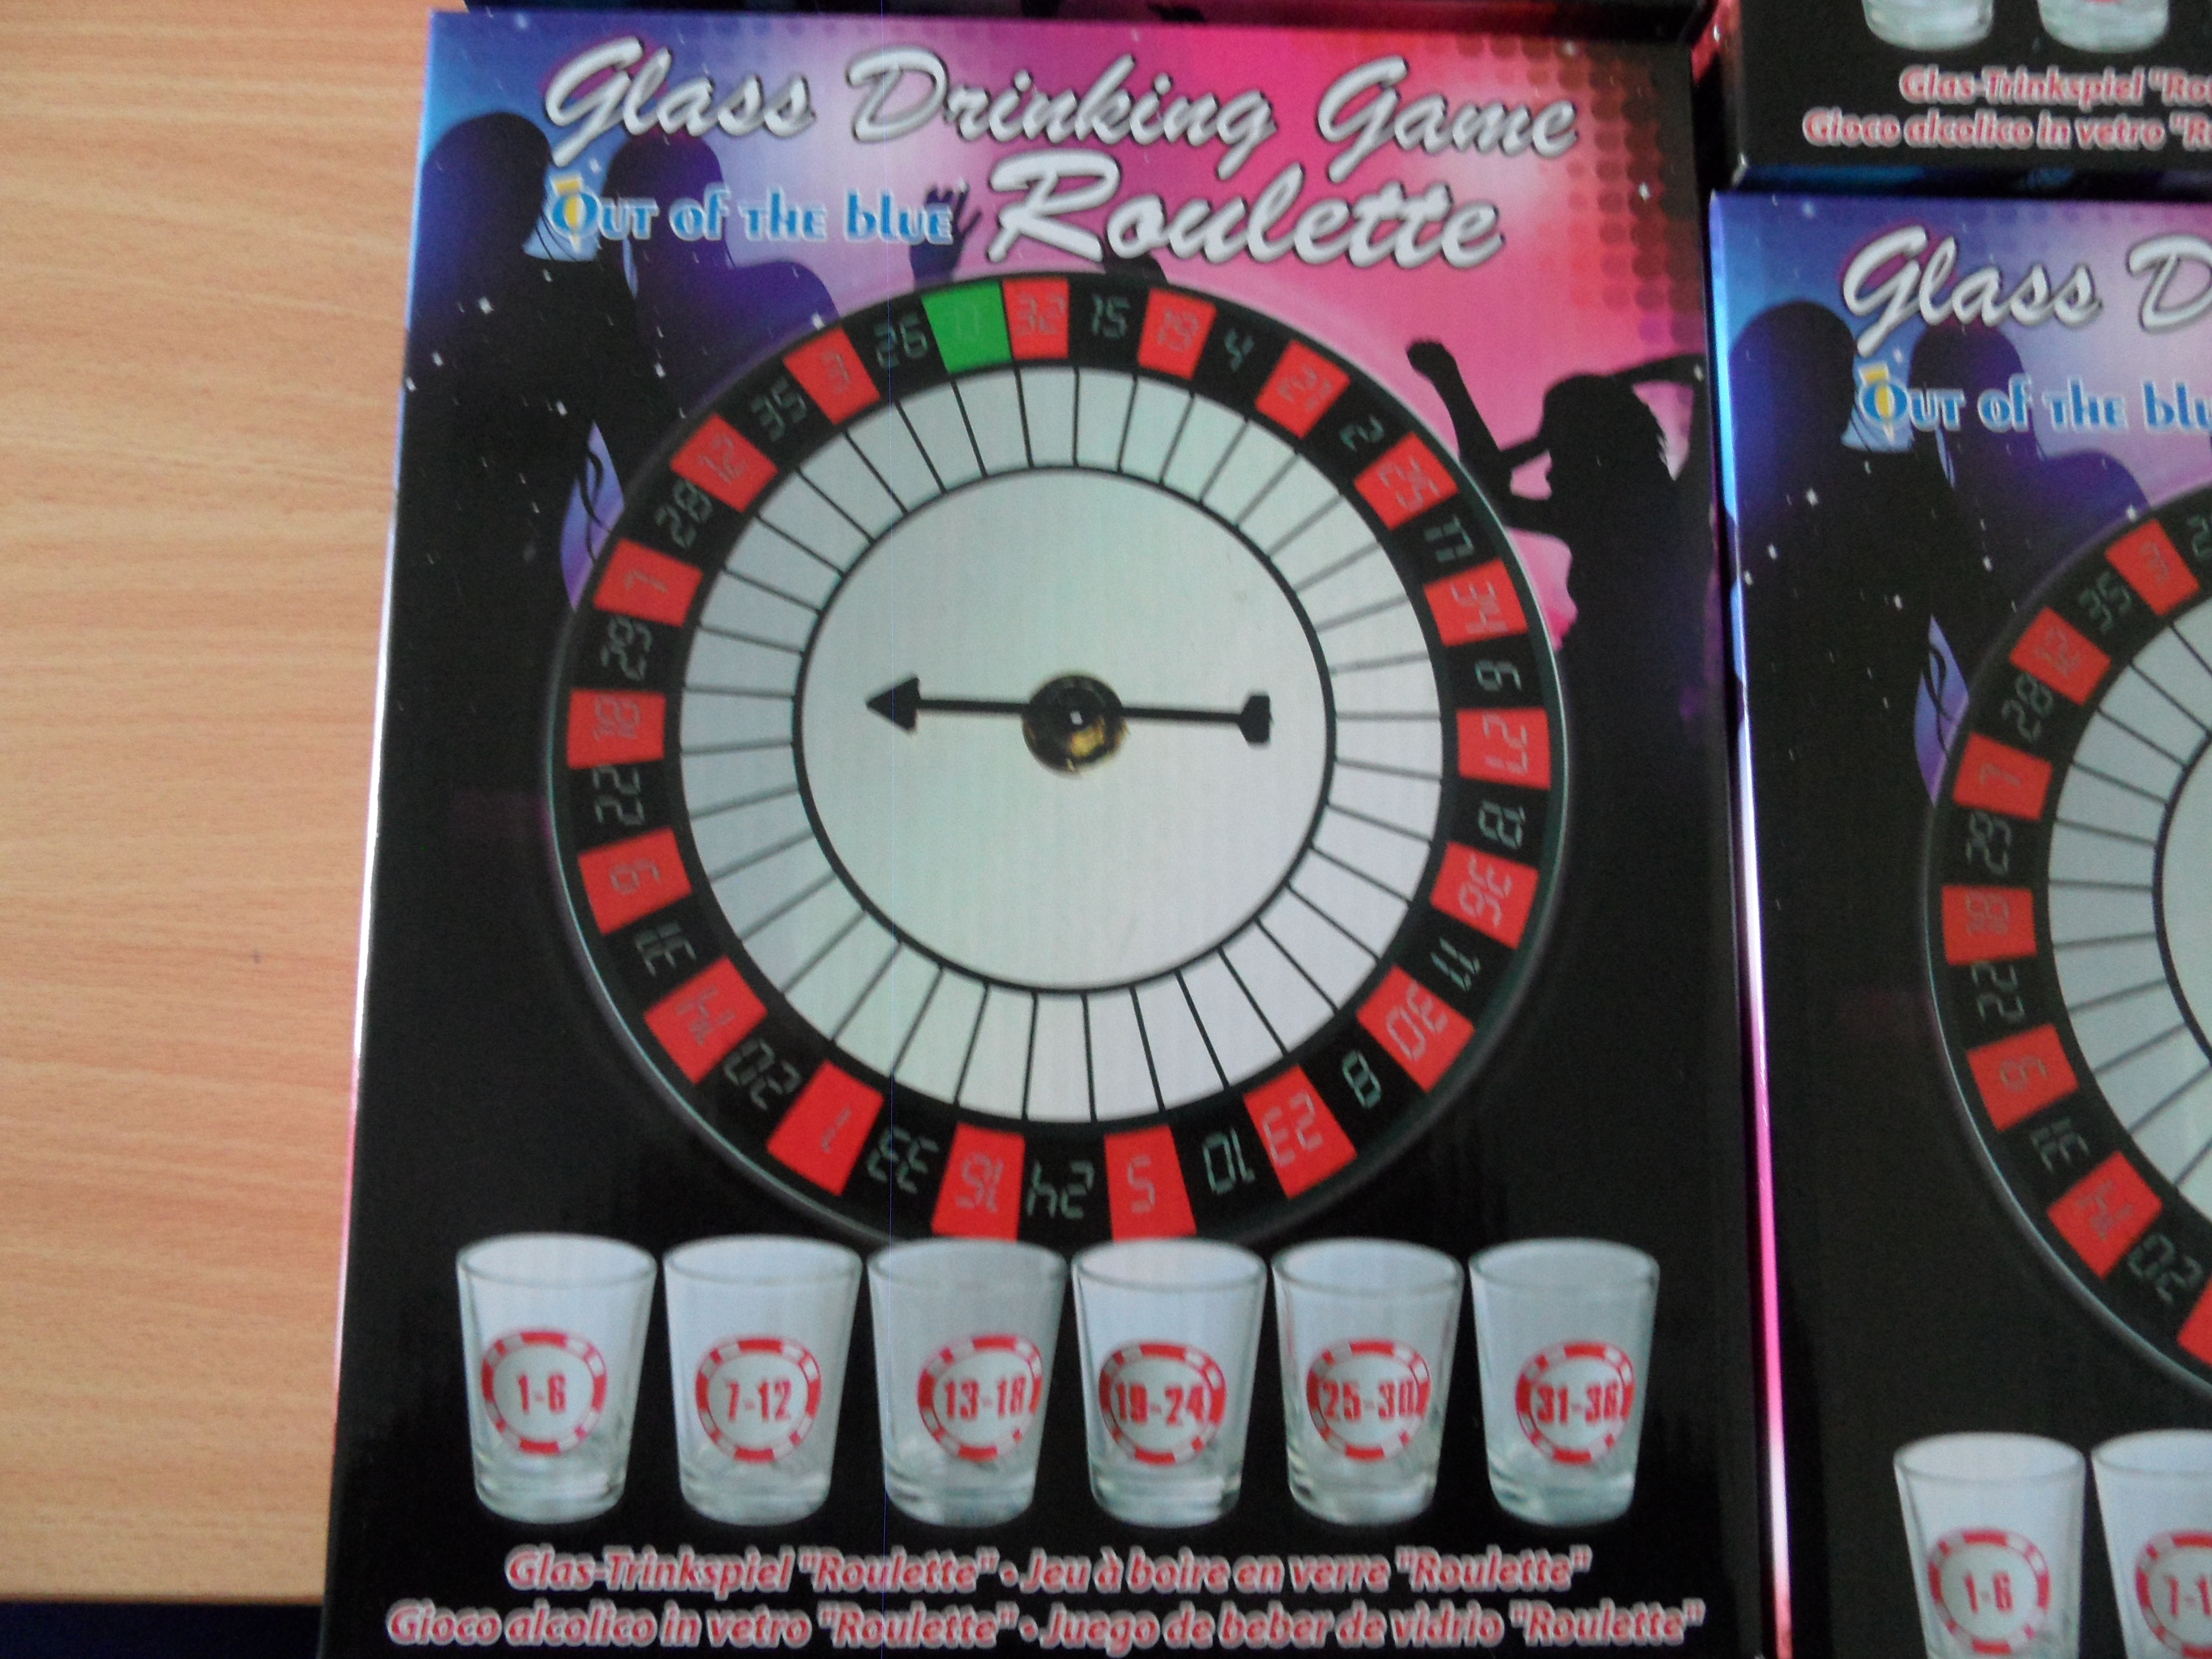 Joblot of 12 x Roulette Glass Drinking Game - Spin & Shot Casino - Glasses Party Wheel - Stag Hen Do's - Alcohol Fun Glass Set - Adult 18+ - Party Nov